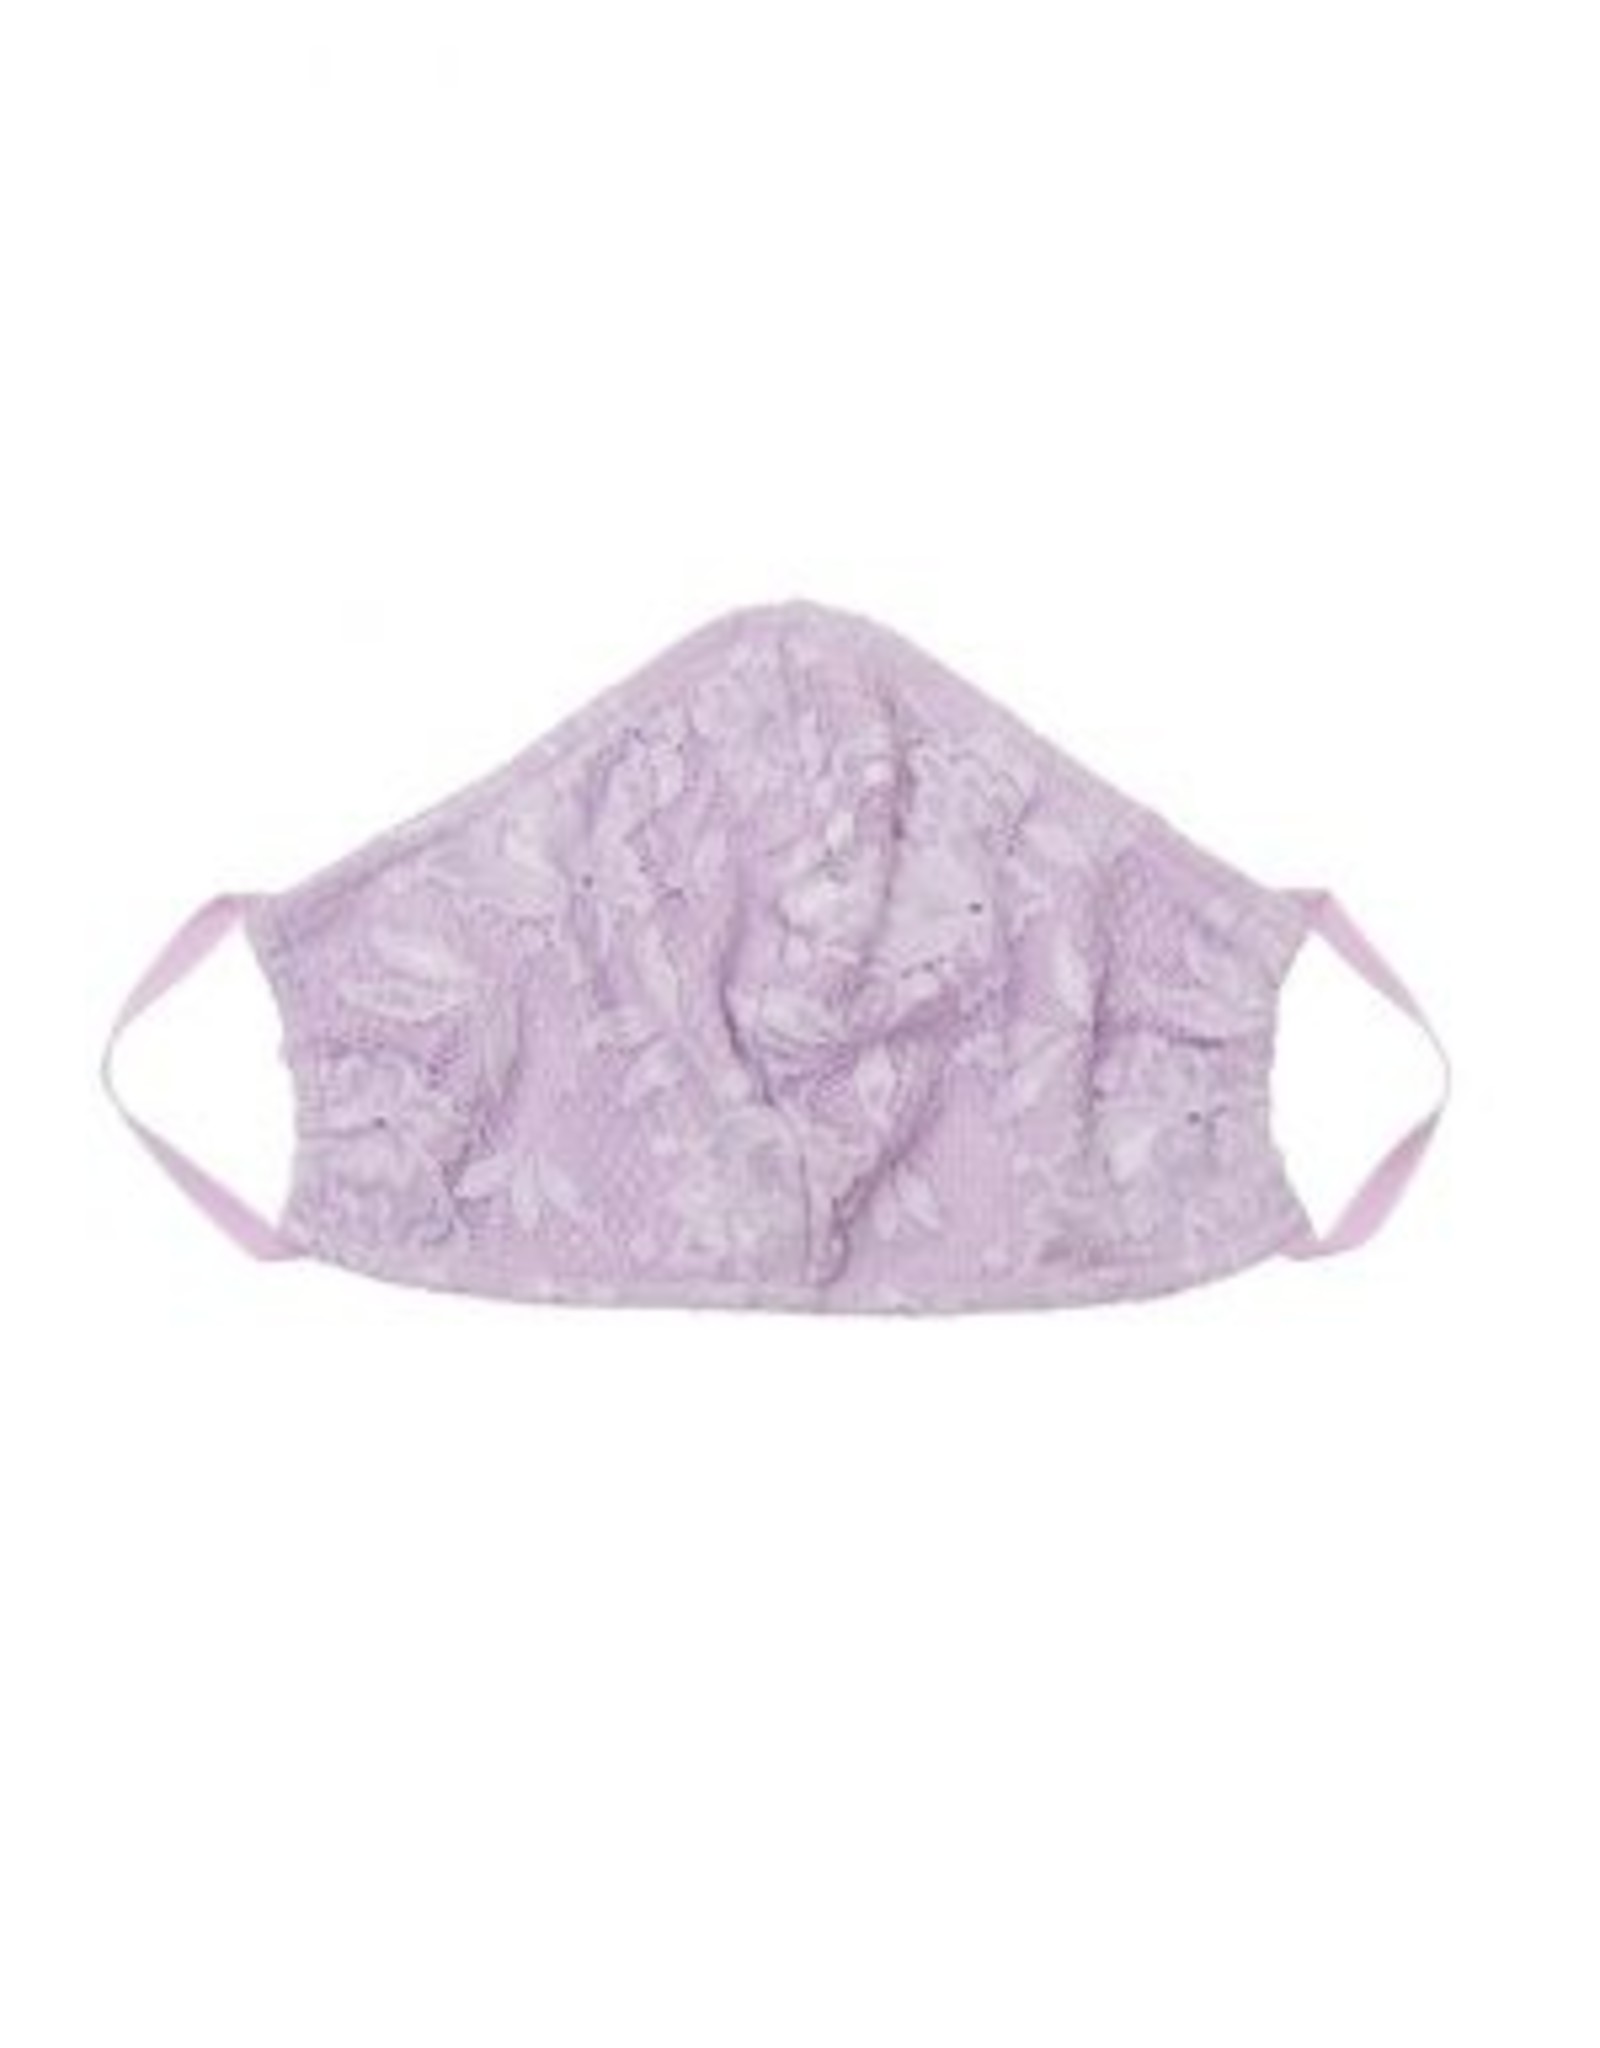 Never Say Never Lace Face Mask by COSABELLA at Brachic - Brachic